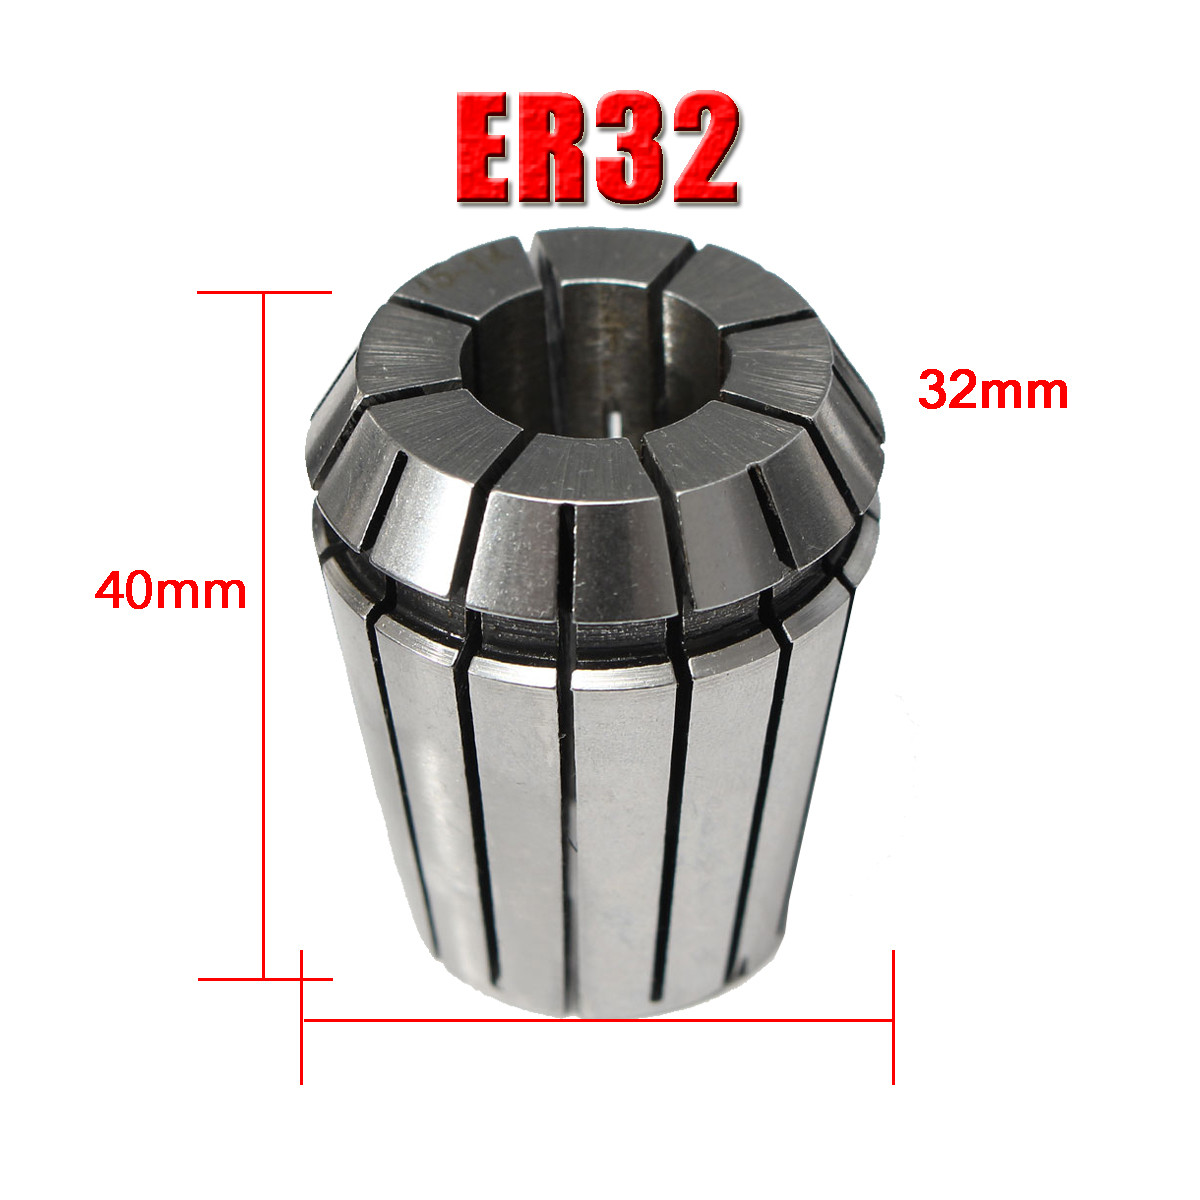 19Pcs-ER32-2mm-20mm-Precision-Spring-Chuck-Set-for-CNC-Workholding-Engraving-and-Milling-Lathe-Tool-1853943-11